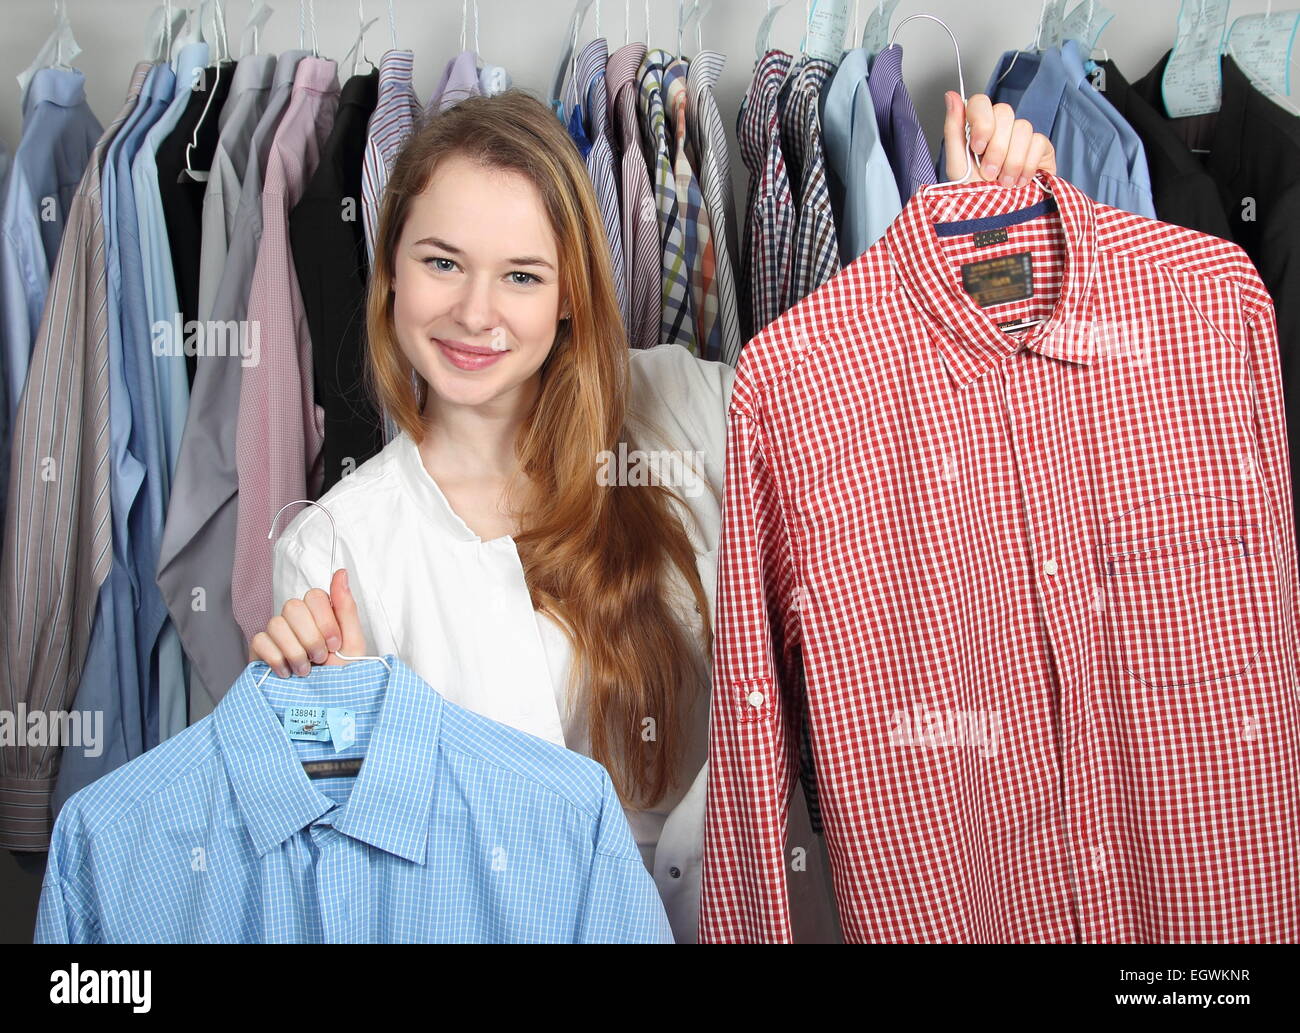 A Employee of a dry cleaning presenting two clean shirts Stock Photo